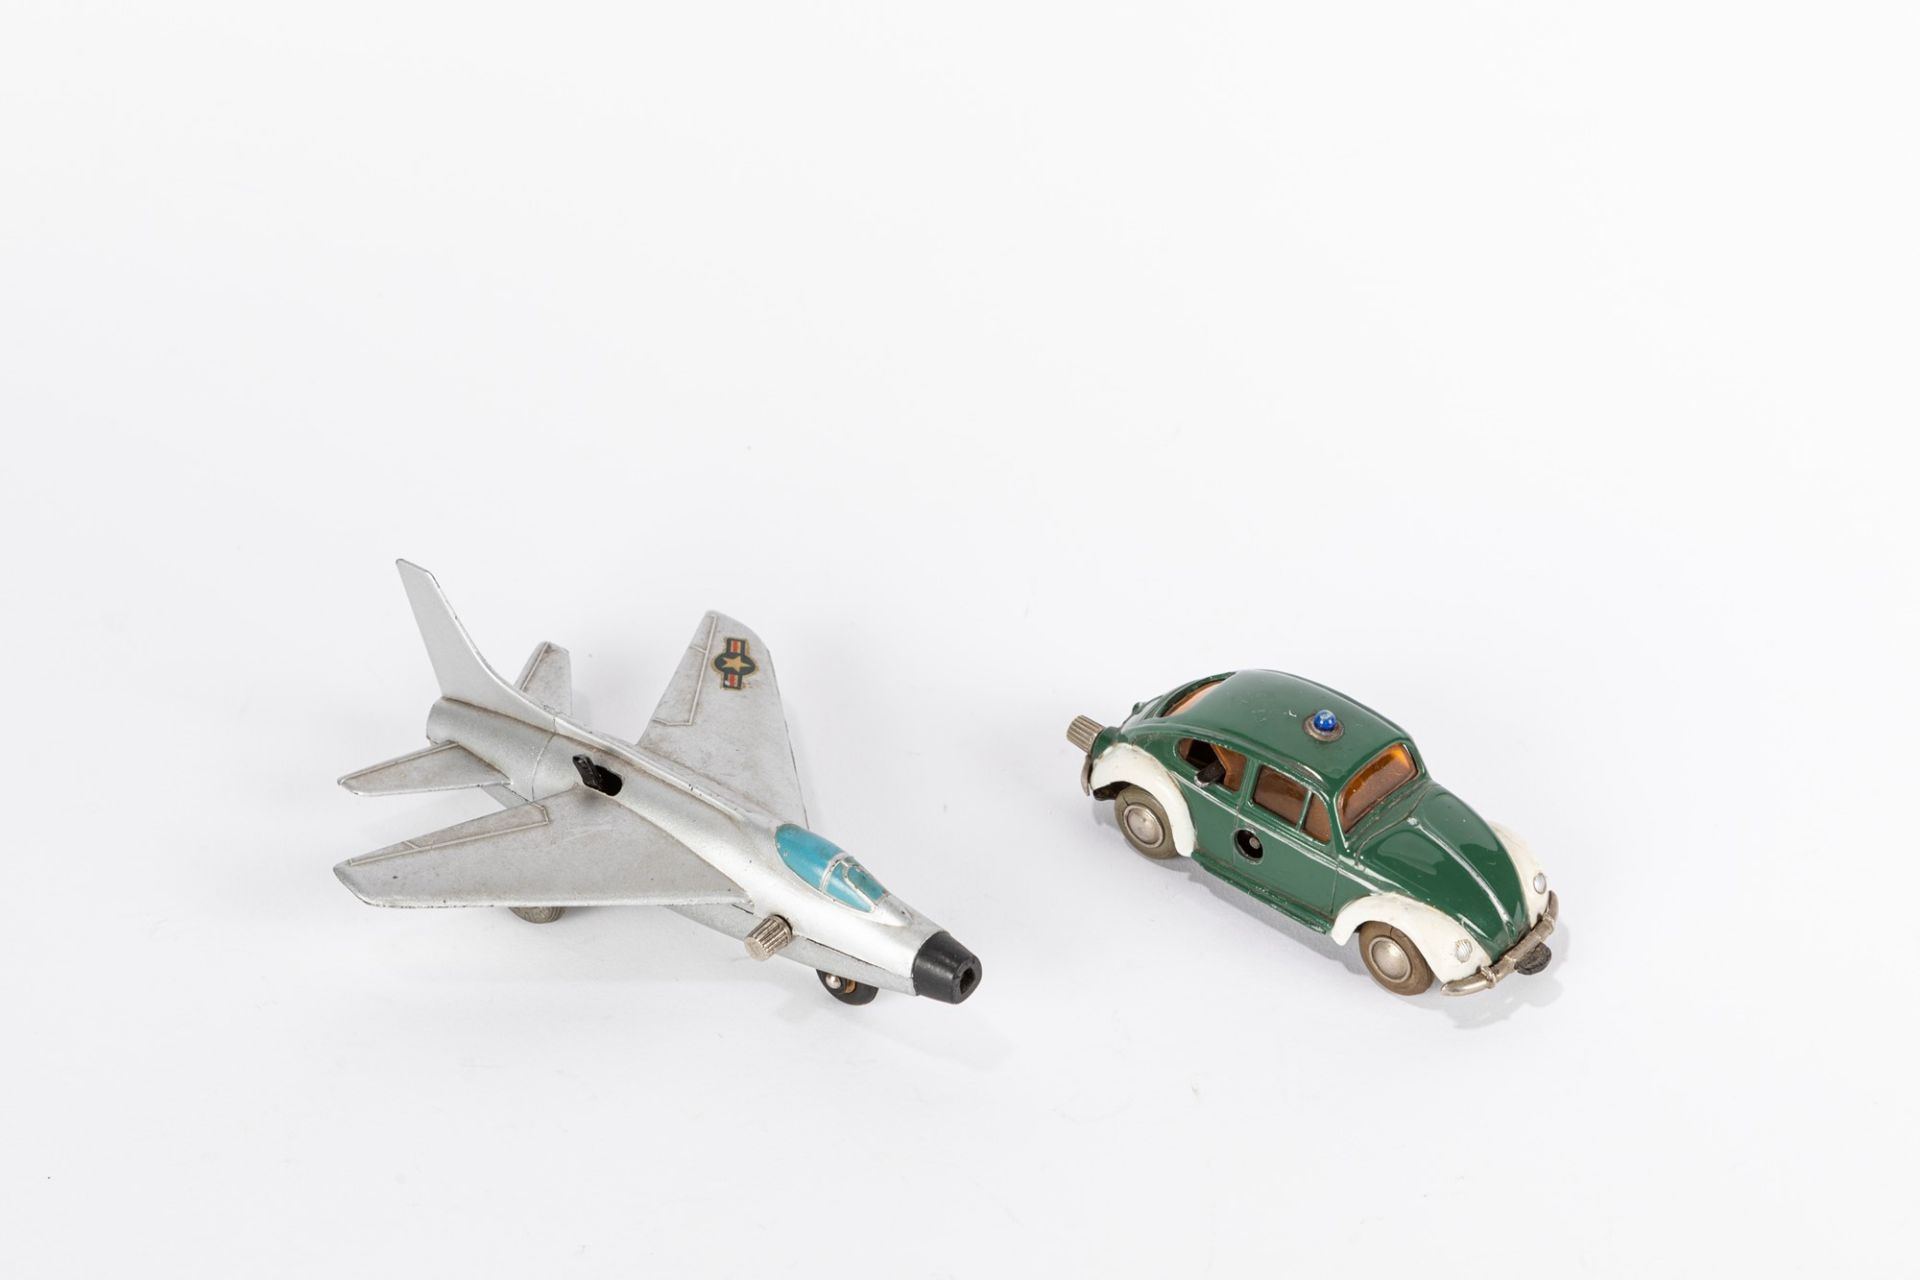 Schuco - 2 Micr-Racer: model 1046 Volkswager and model 1032 Micro Jet